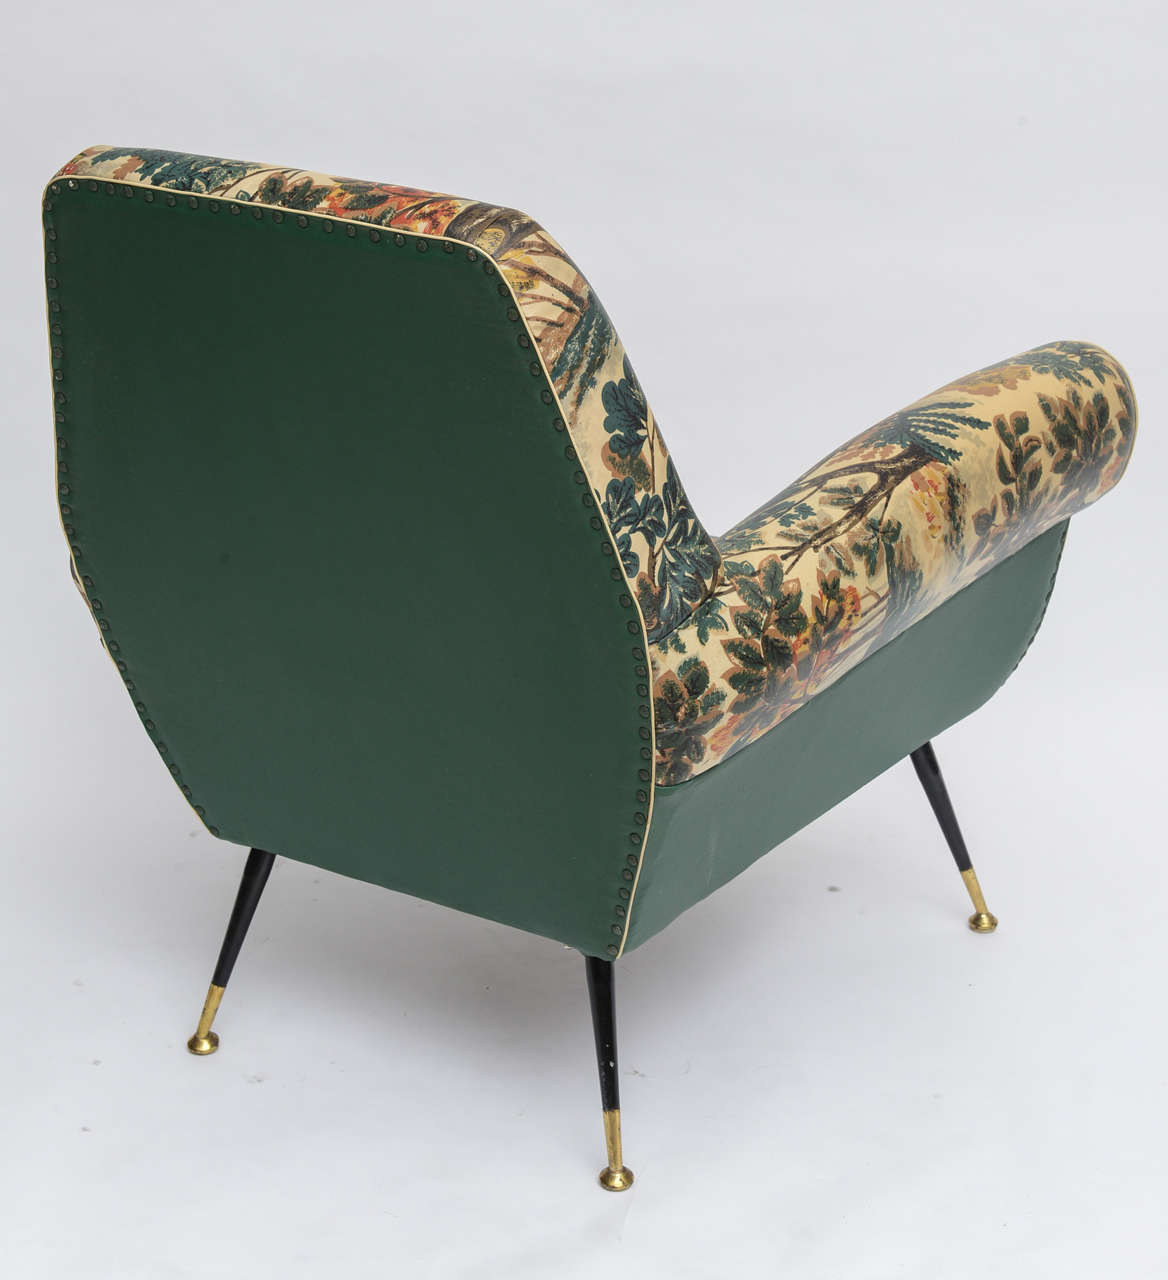 Metal 50's Italian Armchair with Original Upholstery (2 Available)